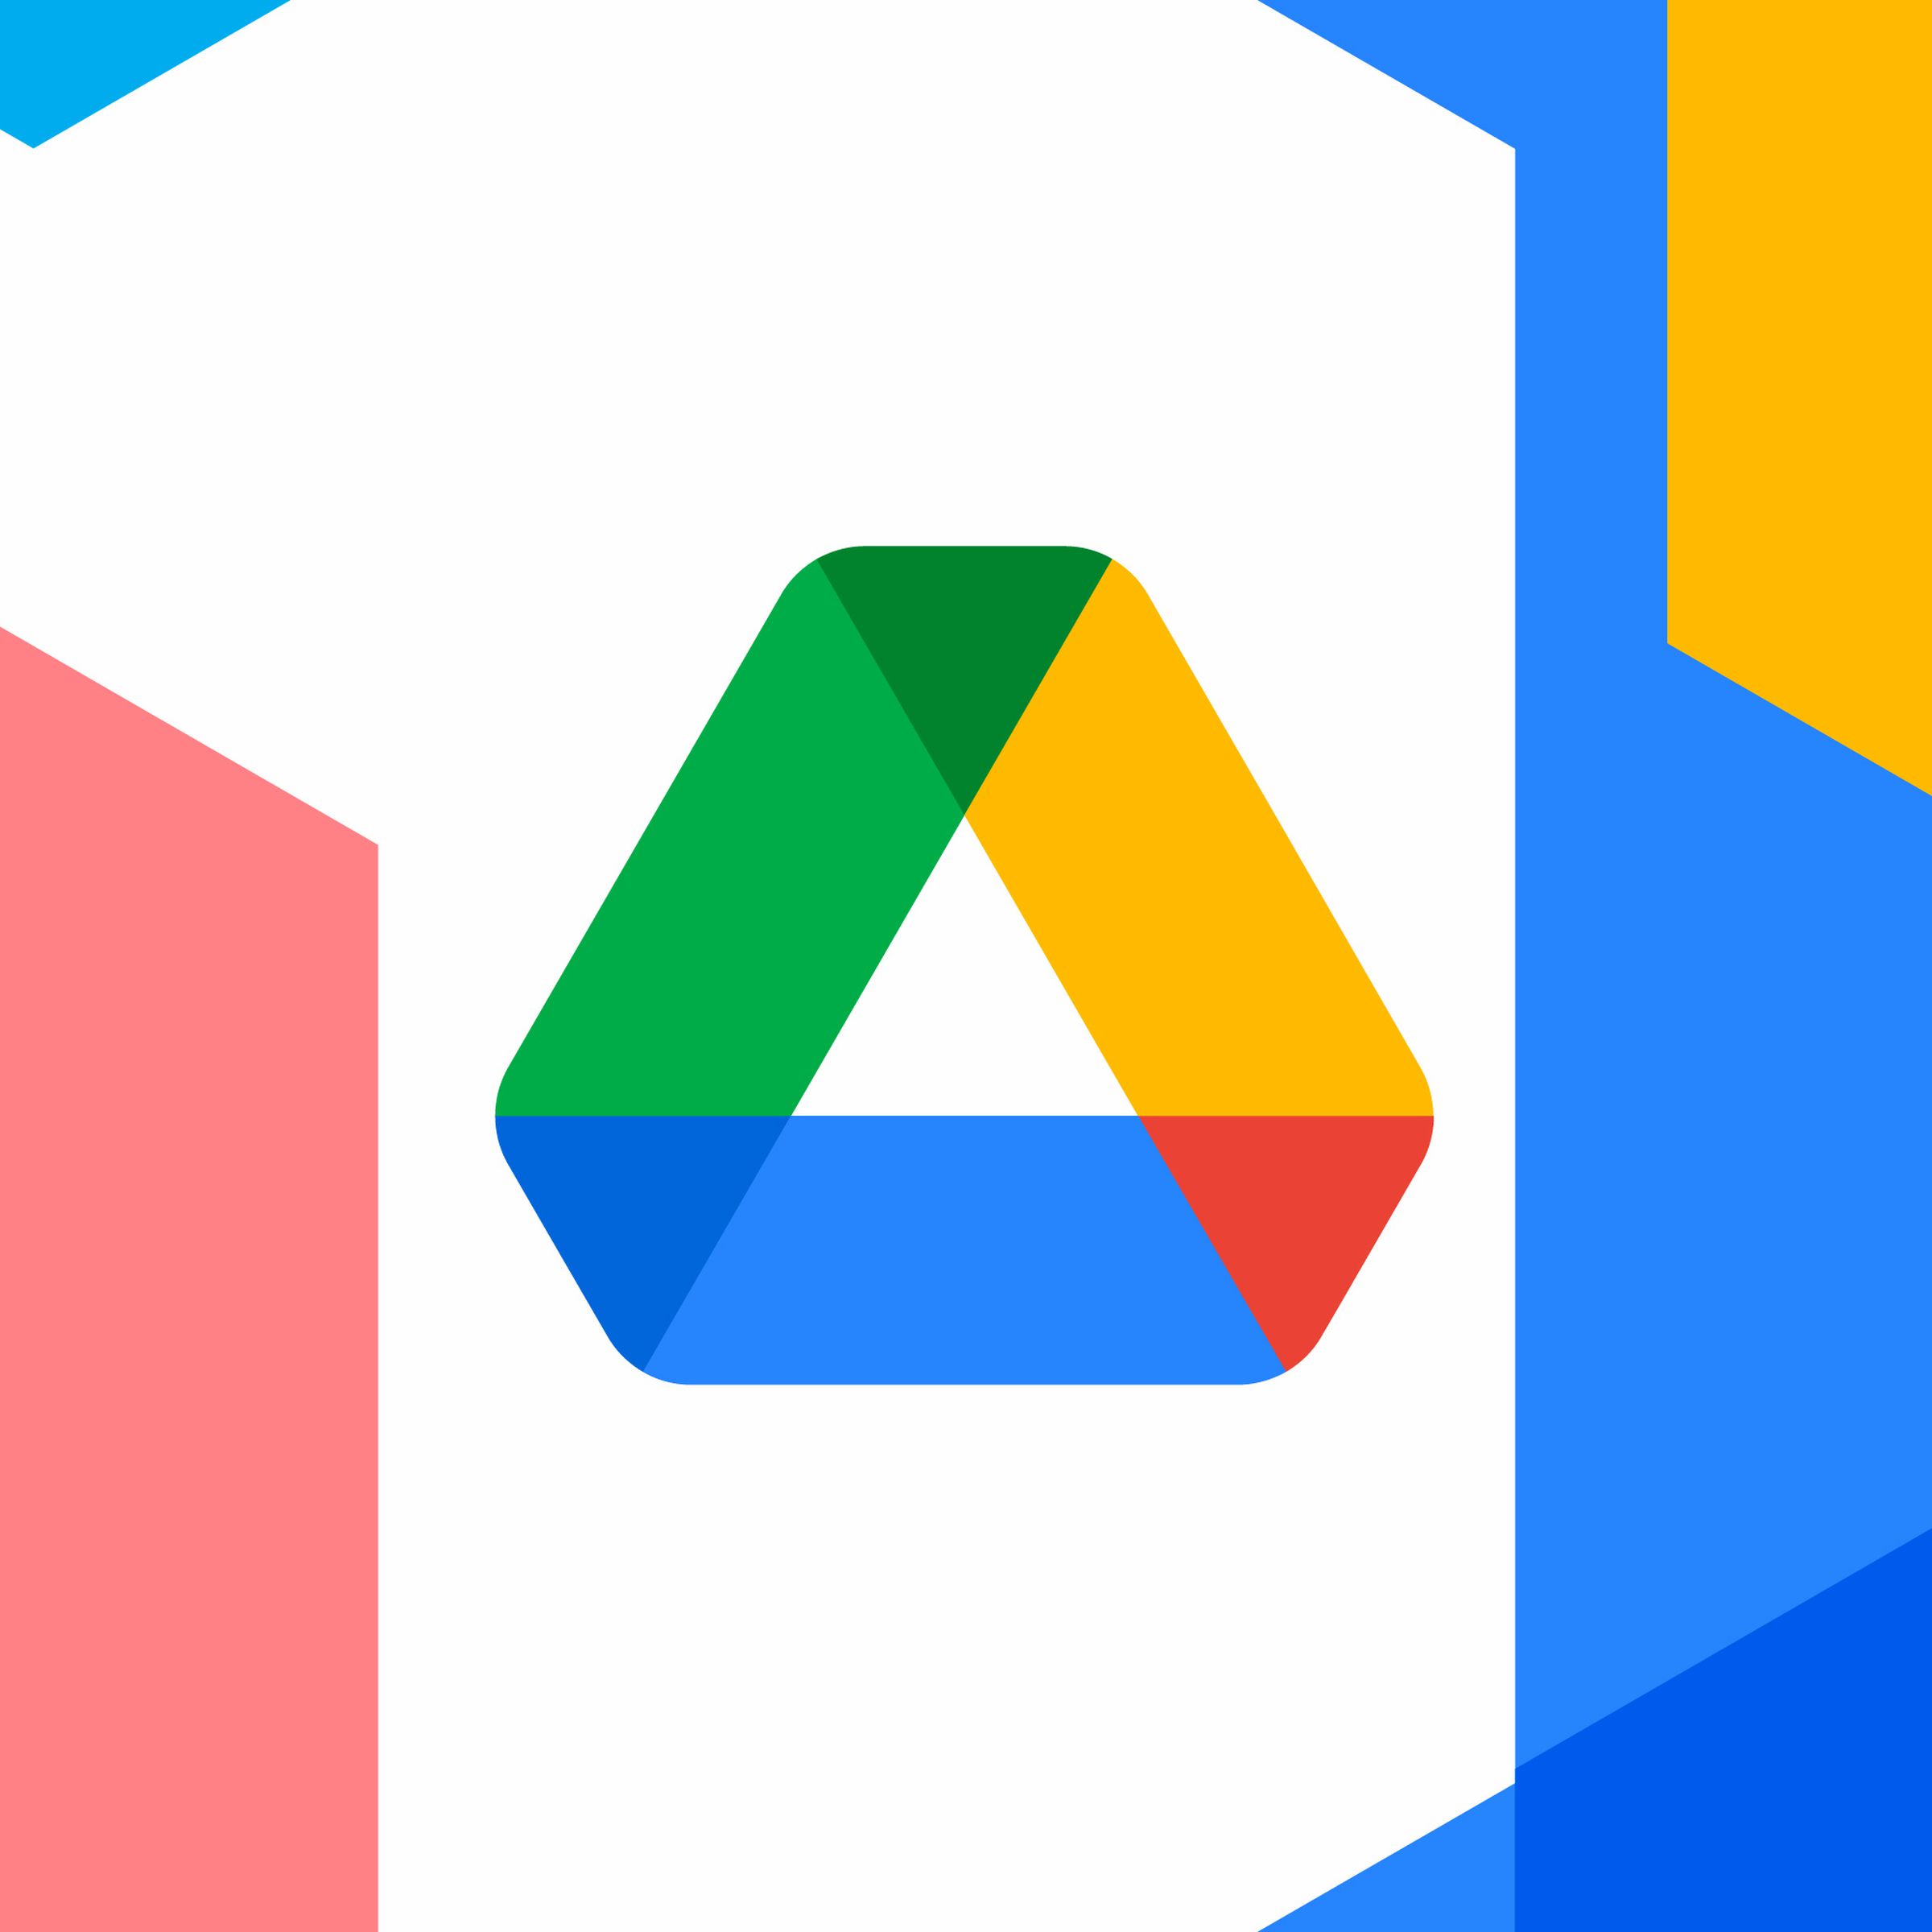 The Google account logo on a colorful background.